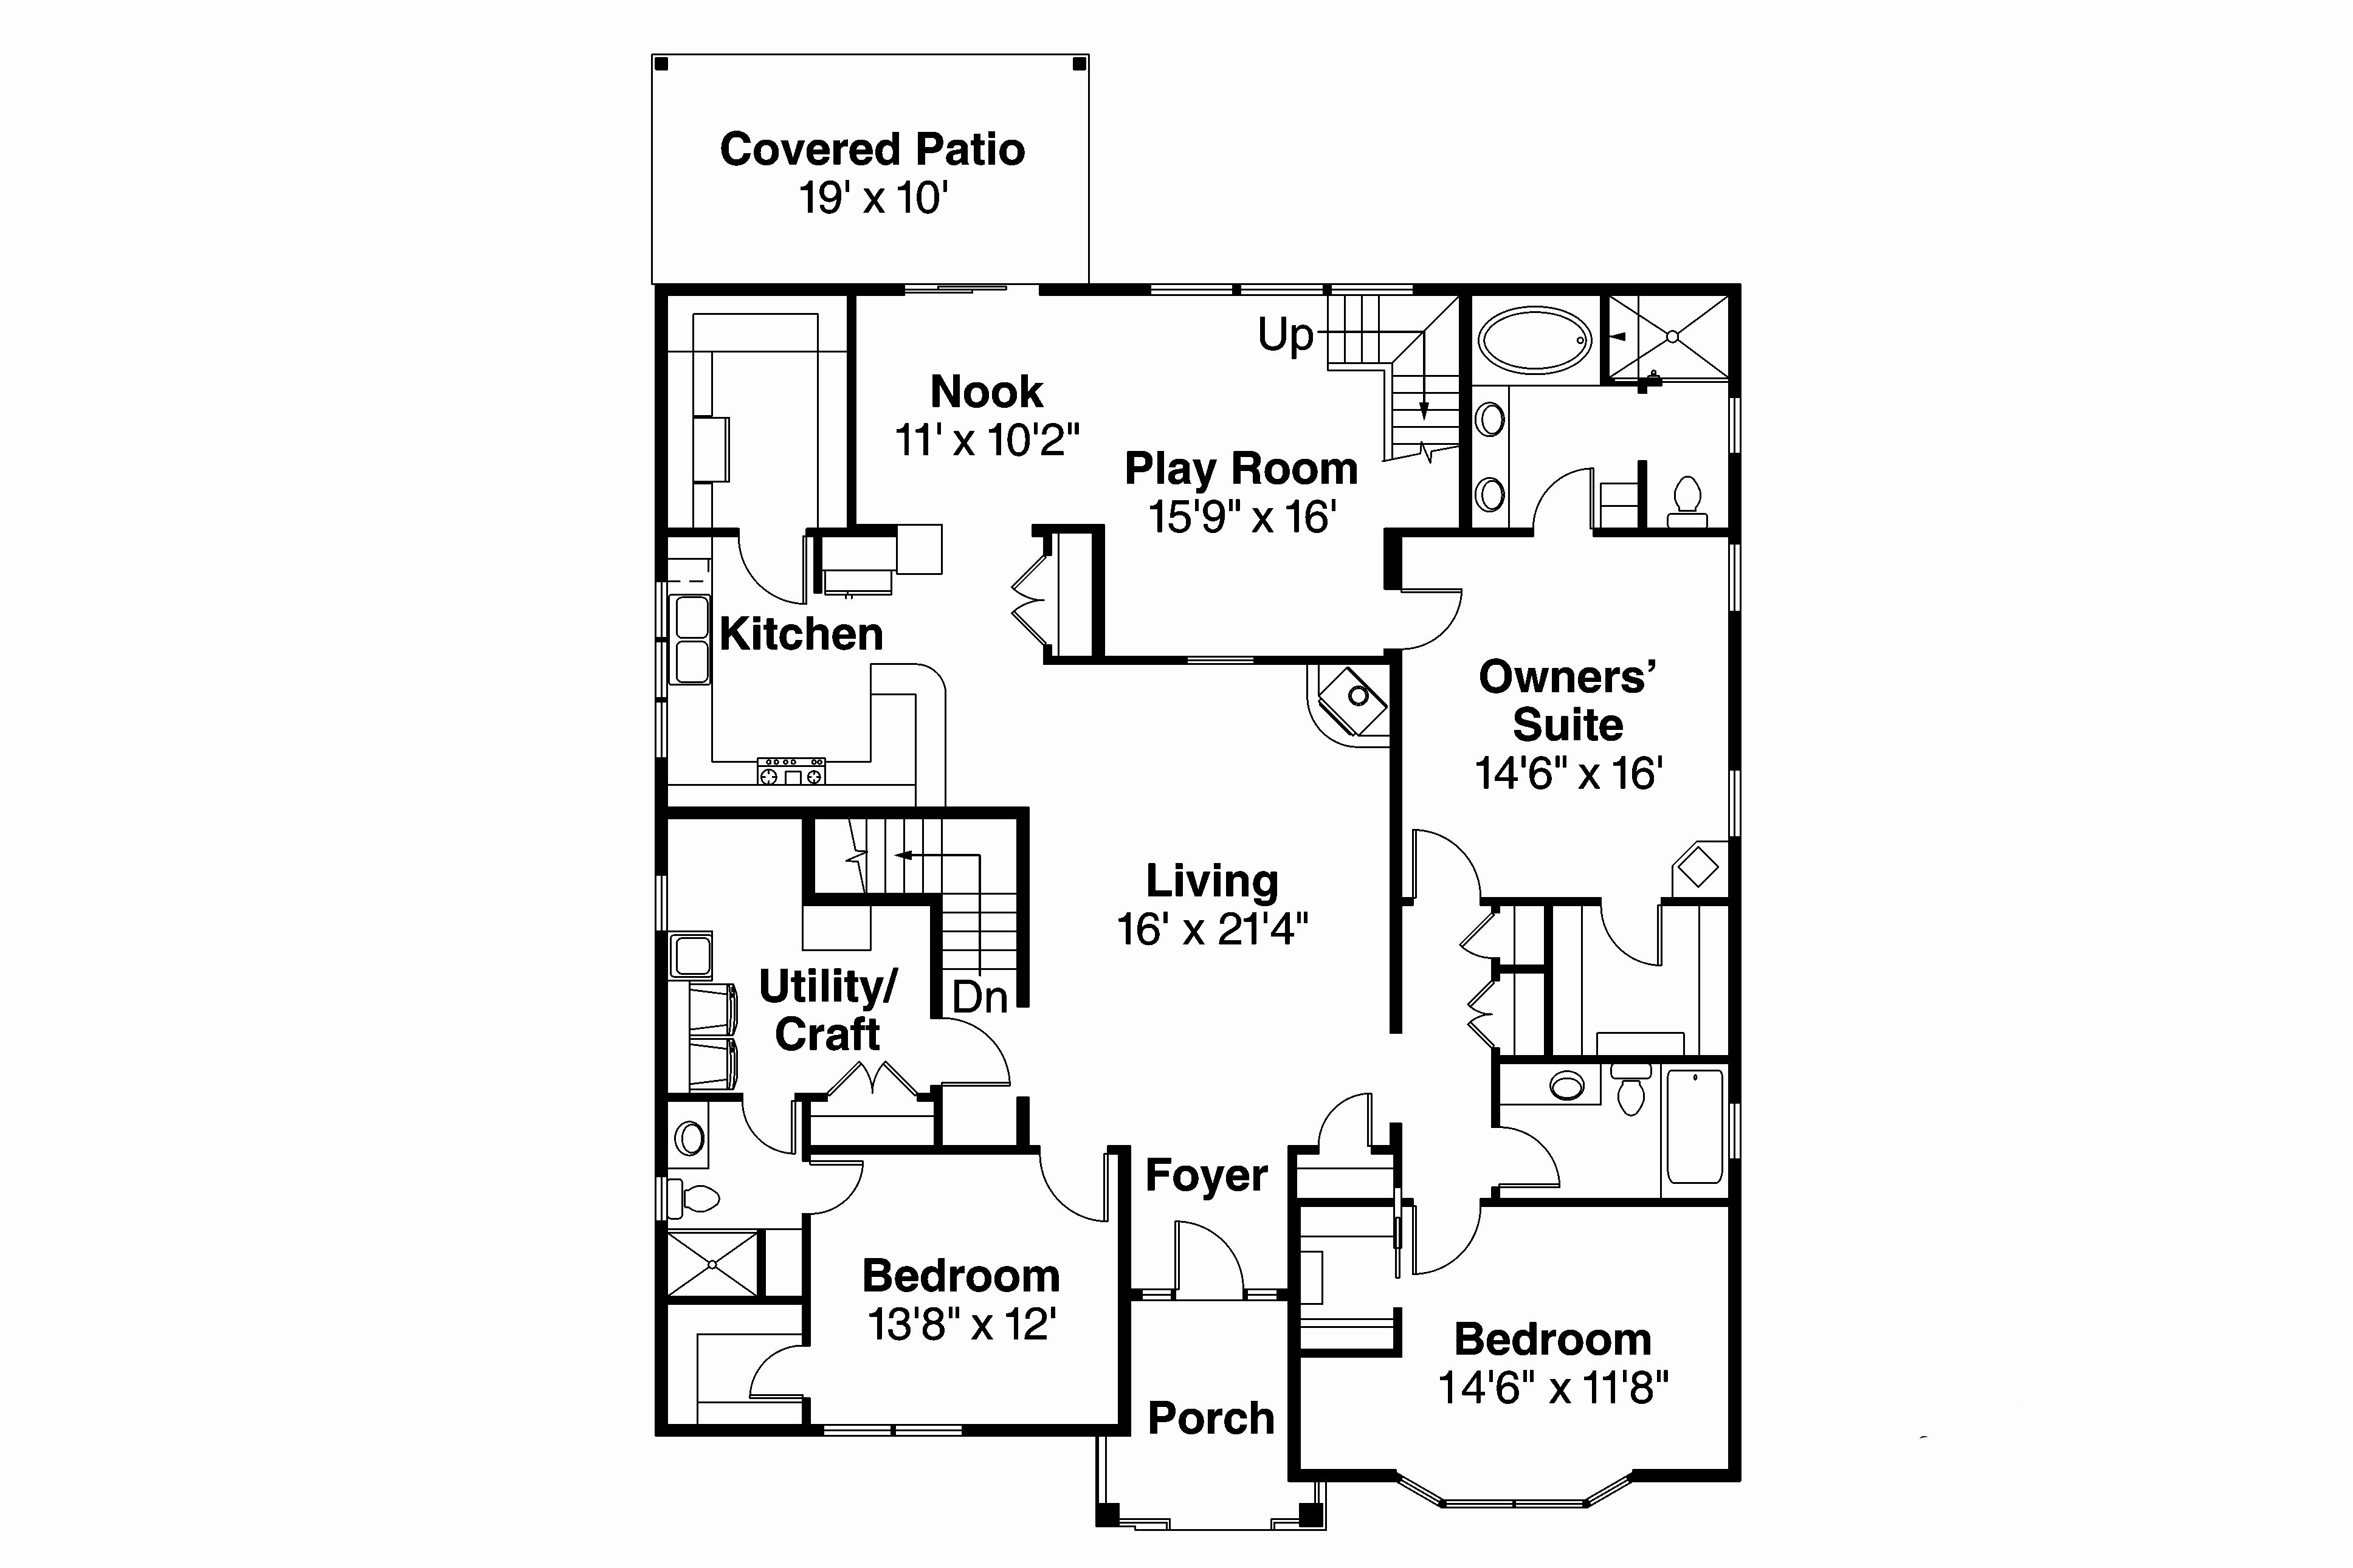 An 214 Luxury Floor Plan 6 Bedroom House Basic Home Plans Unique Index Wiki 0 0d